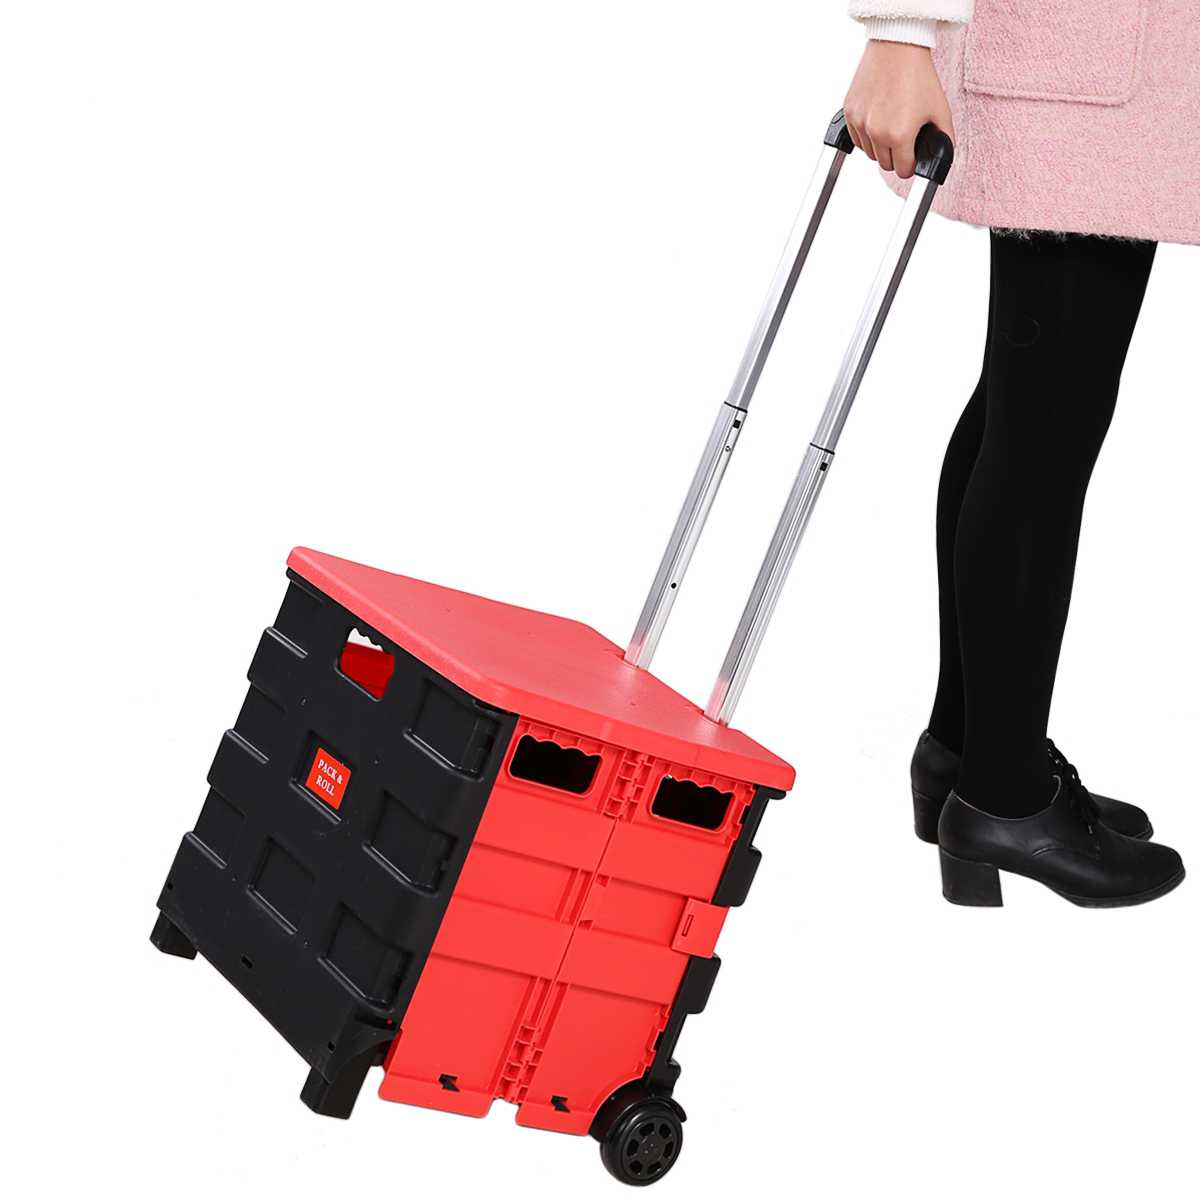 Two-Wheeled Hand Cart Truck Folded Collapsible Folding Cart Shopping Travel Casual Trolley Handcart HITC